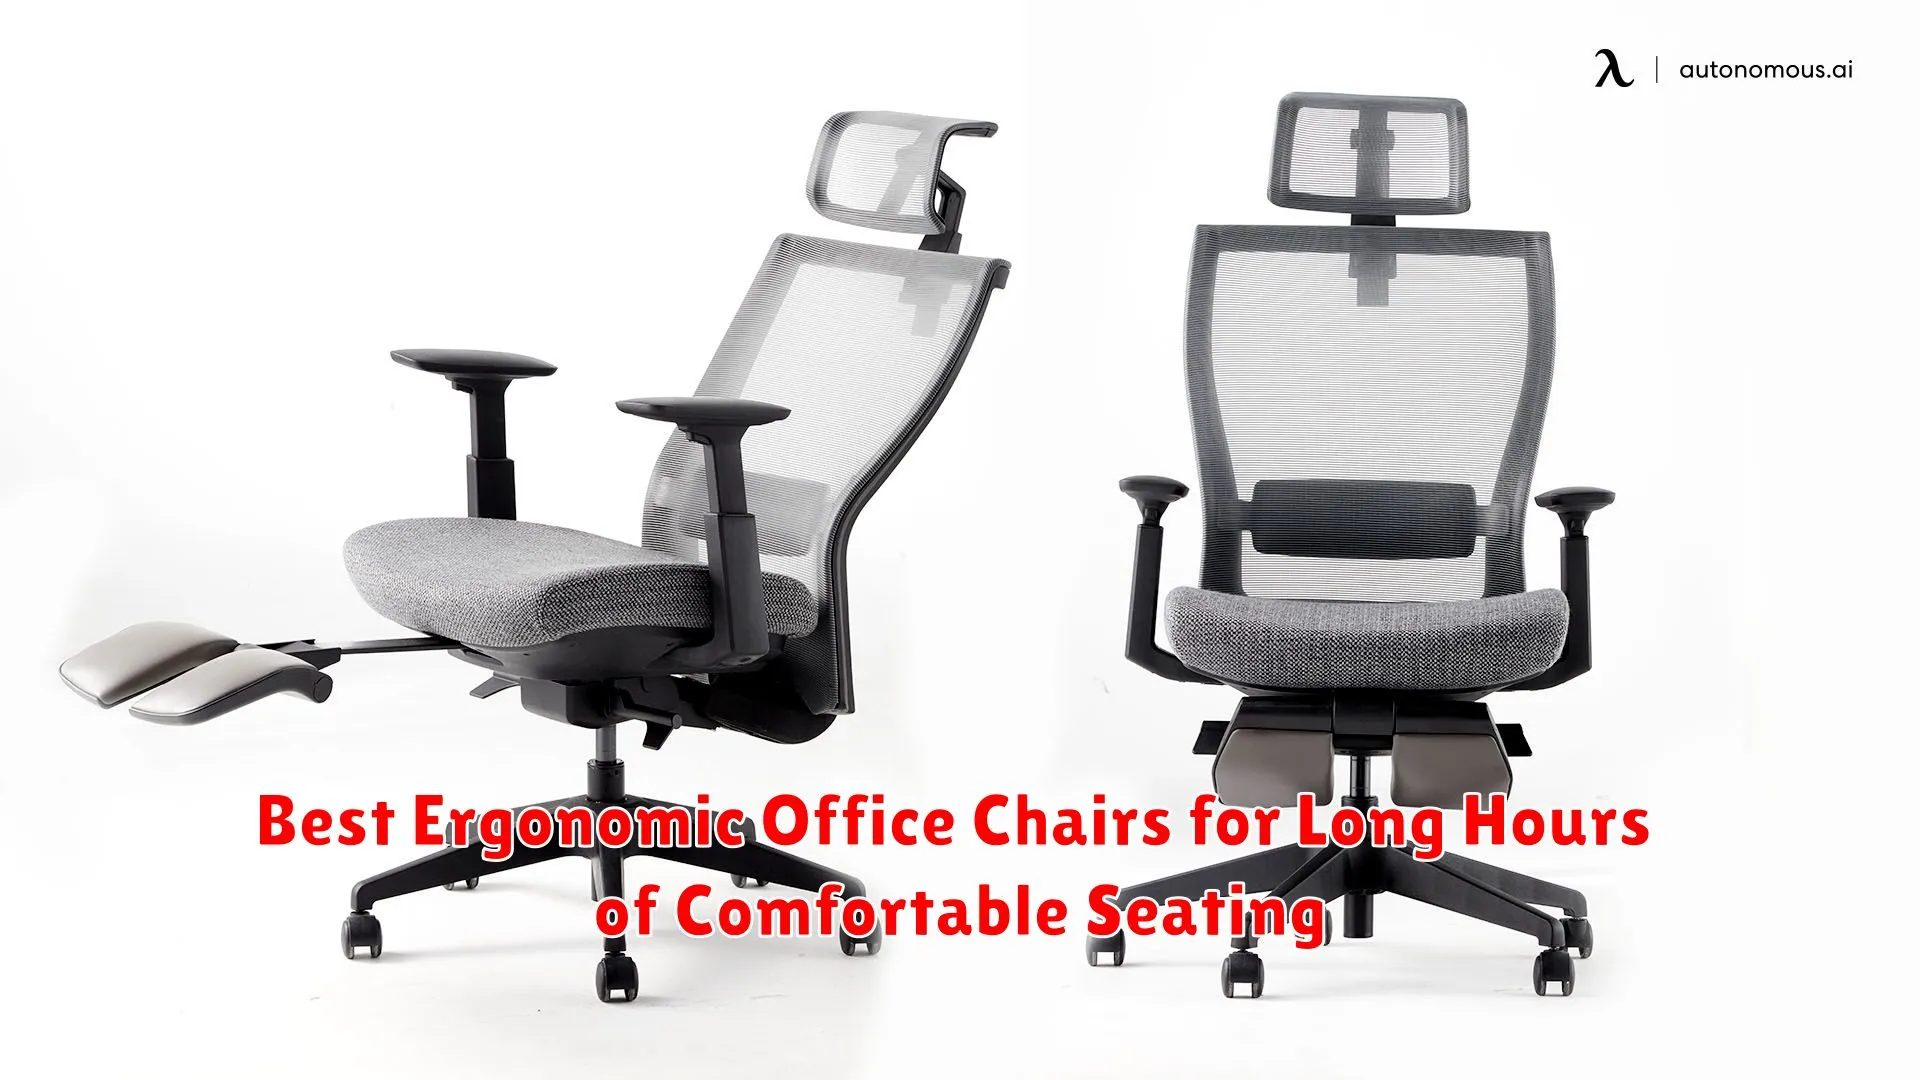 Best Ergonomic Office Chairs for Long Hours of Comfortable Seating